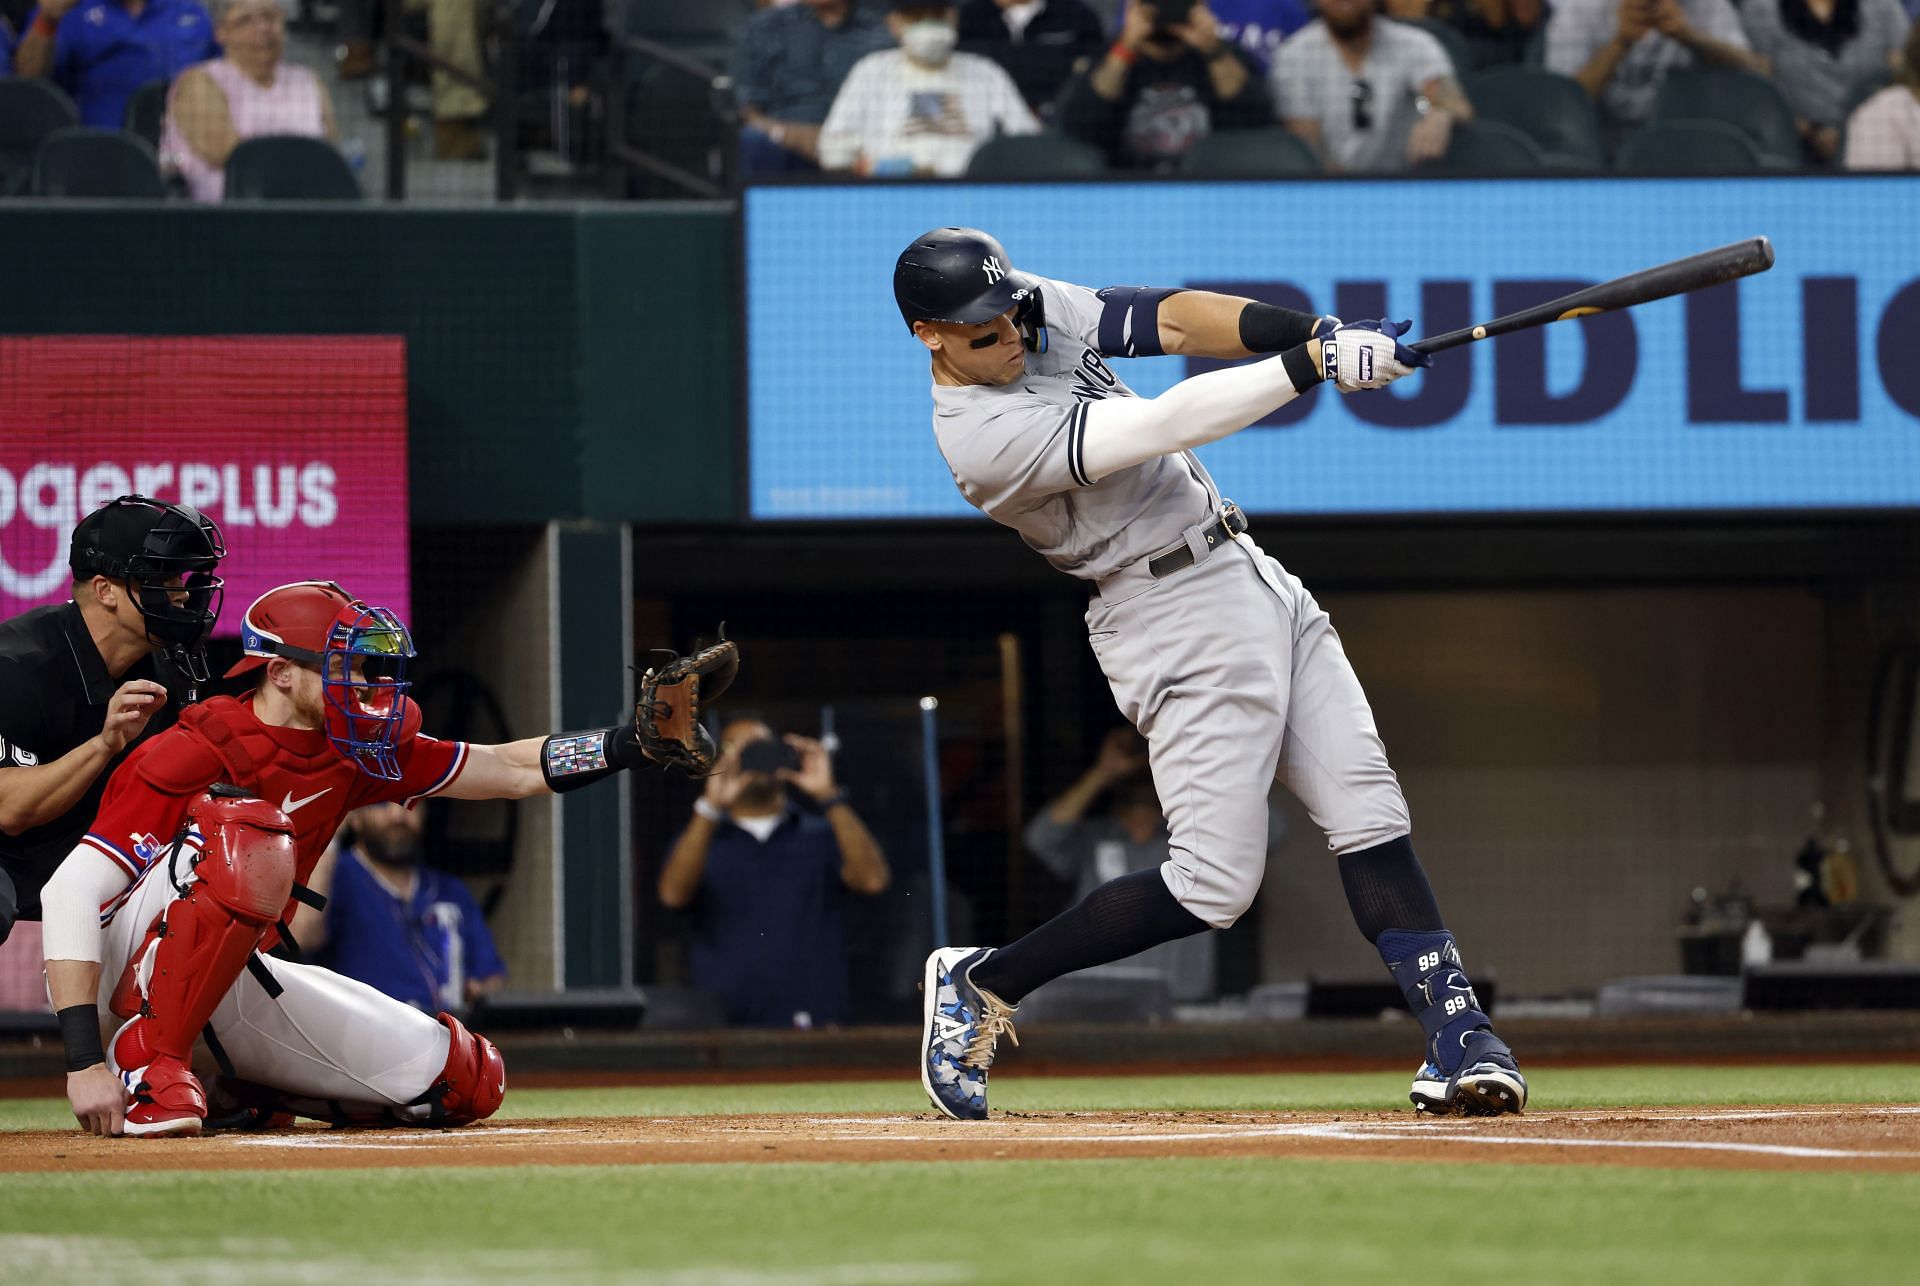 Aaron Judge of the New York Yankees hits his 62nd home run of the season against the Texas Rangers on October 4, 2022, in Arlington, Texas.